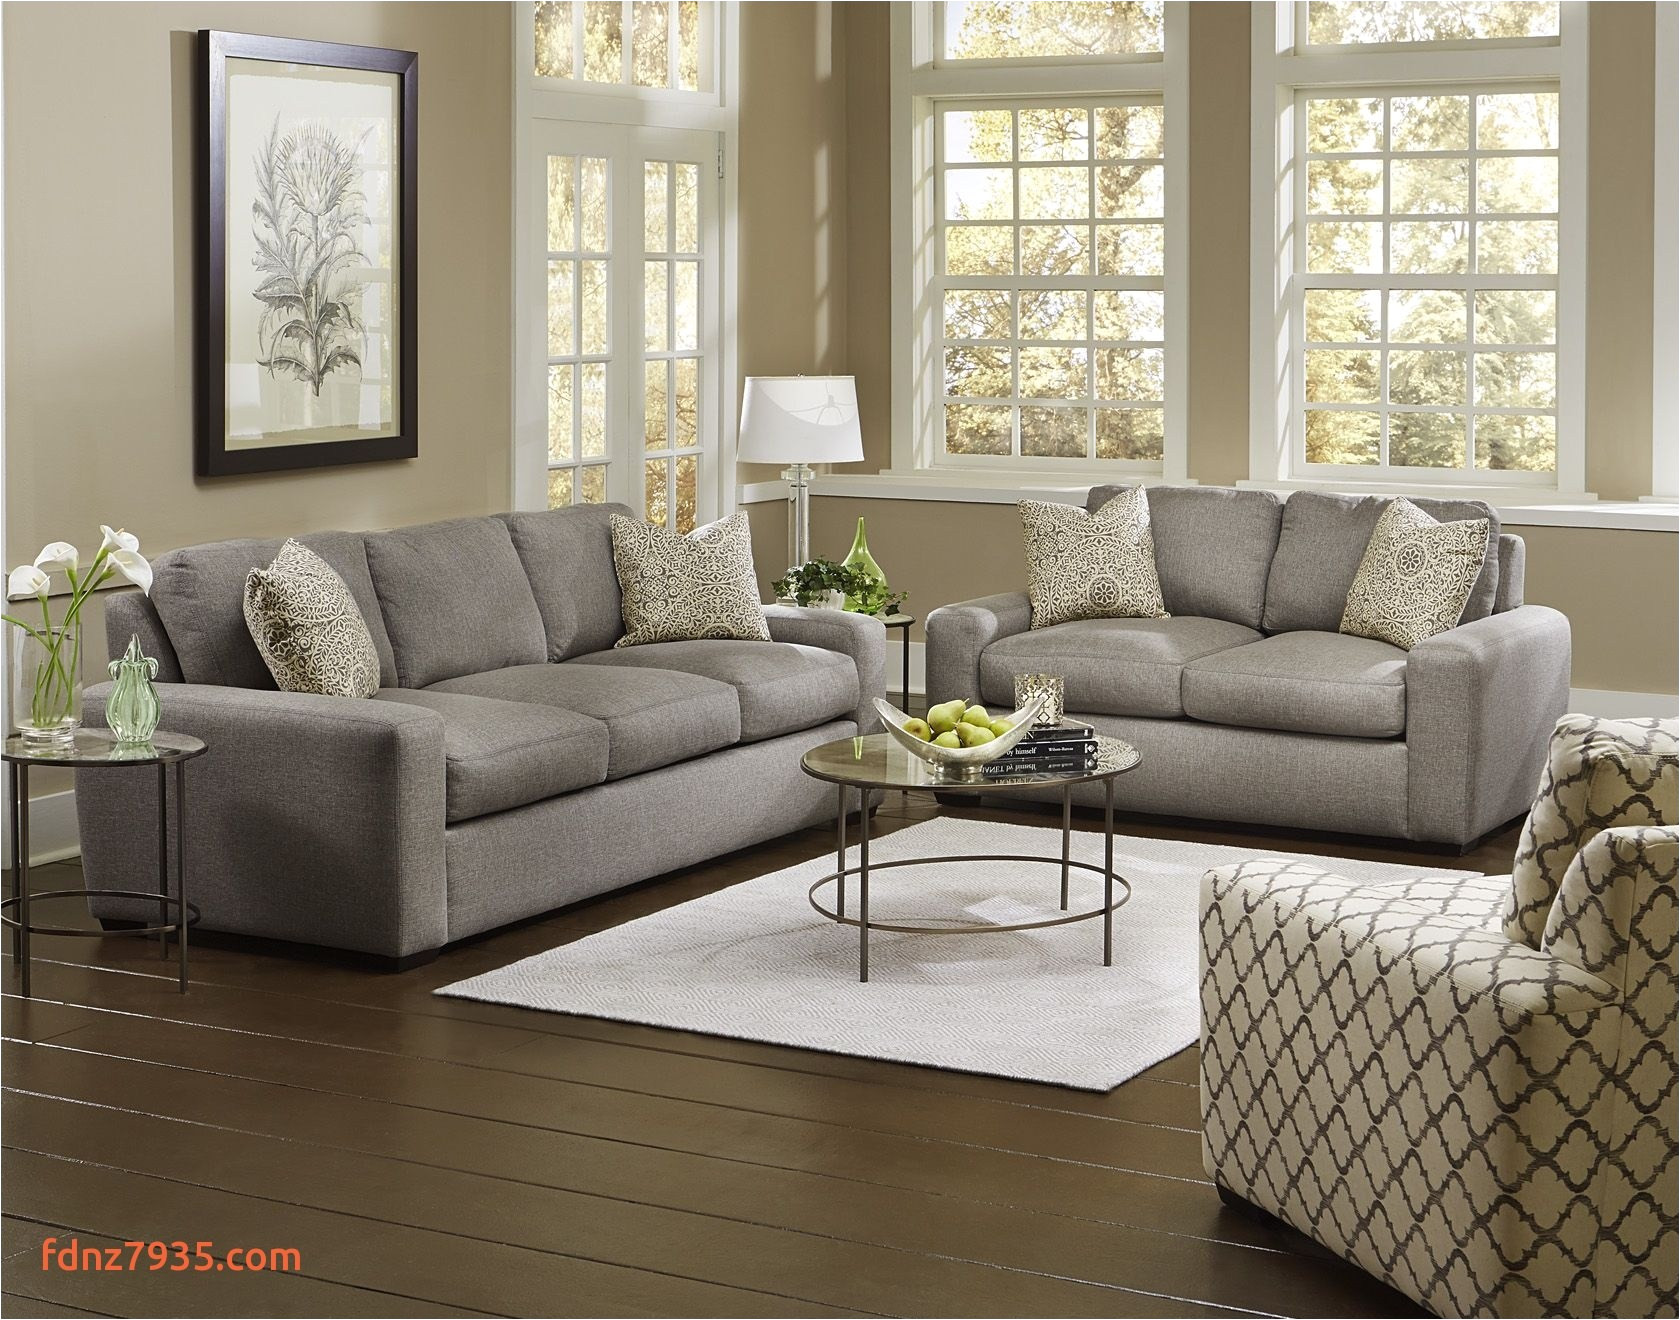 relax in style with this clean lined sofa set from england furniture in grande pewter and